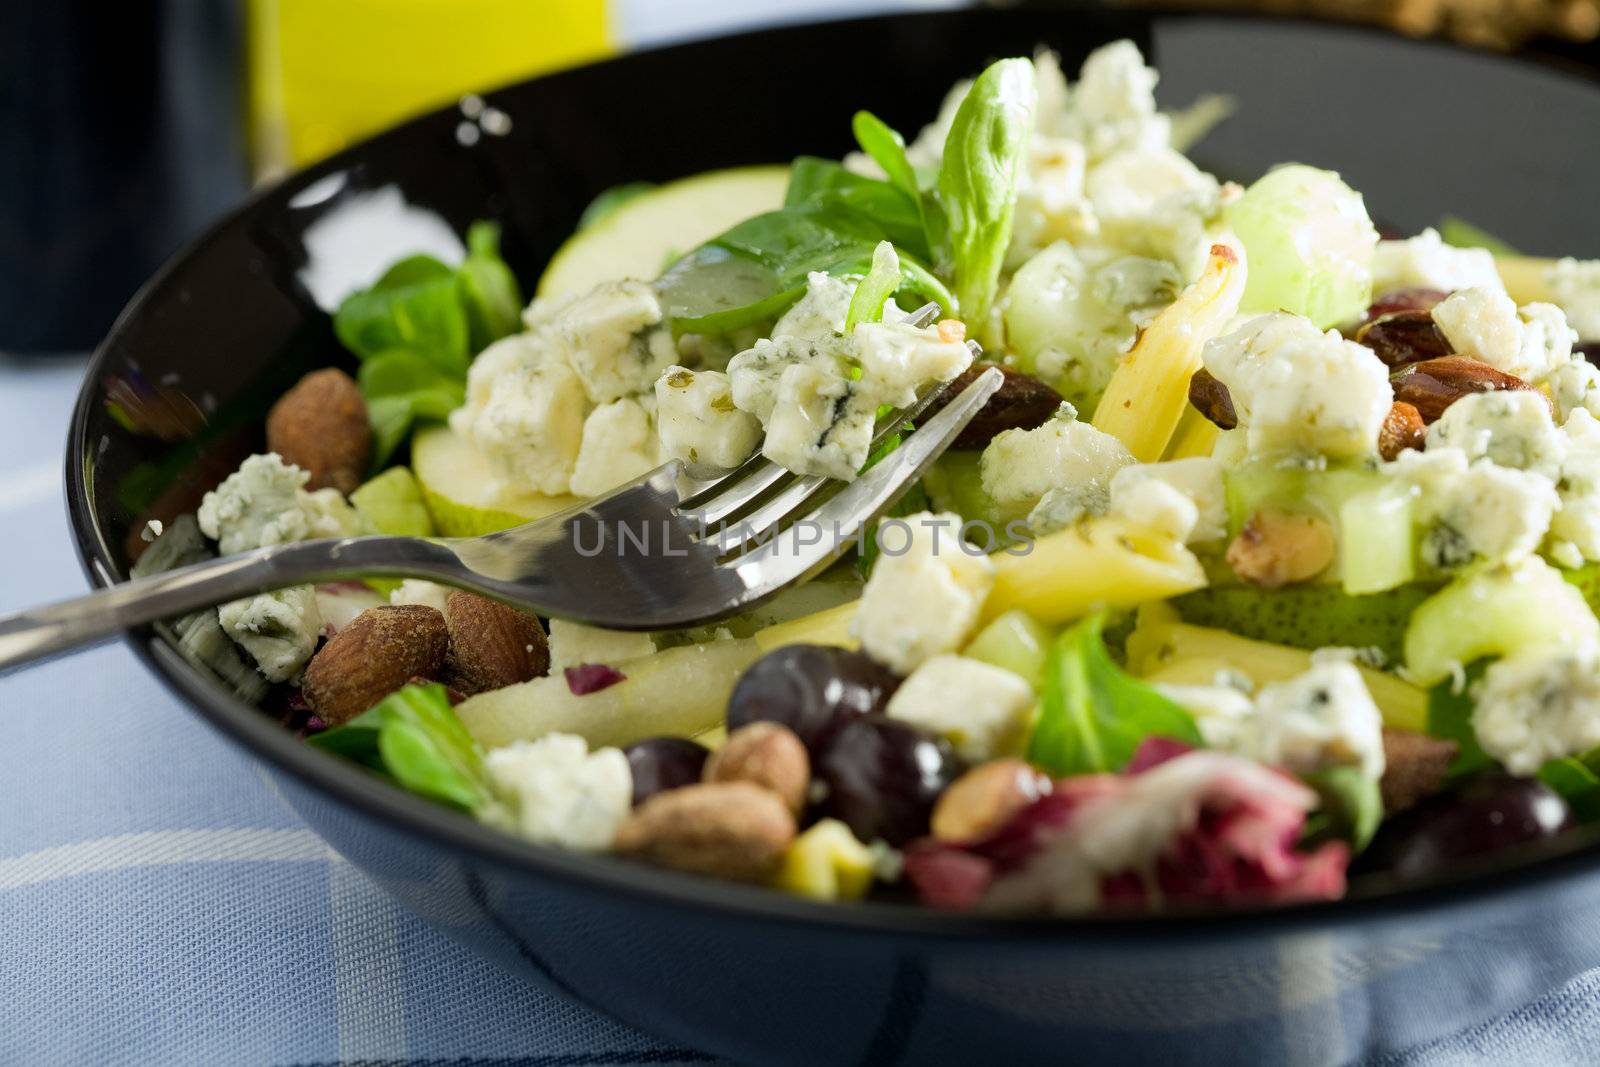 Delicious salad with roquefort, pasta, fruit and vegetables